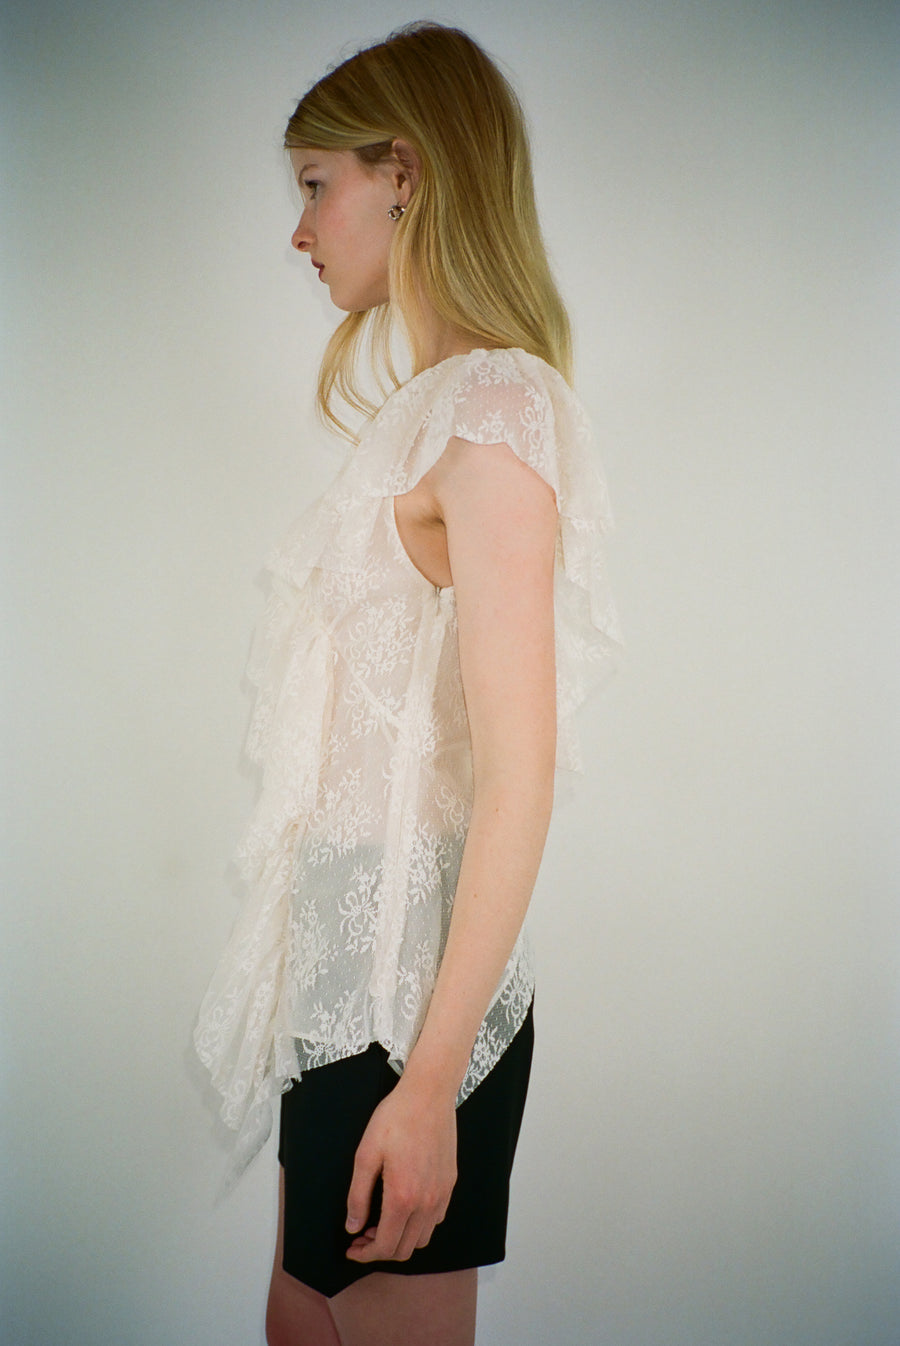 Sleeveless lace top in off white with rosette appliques on model